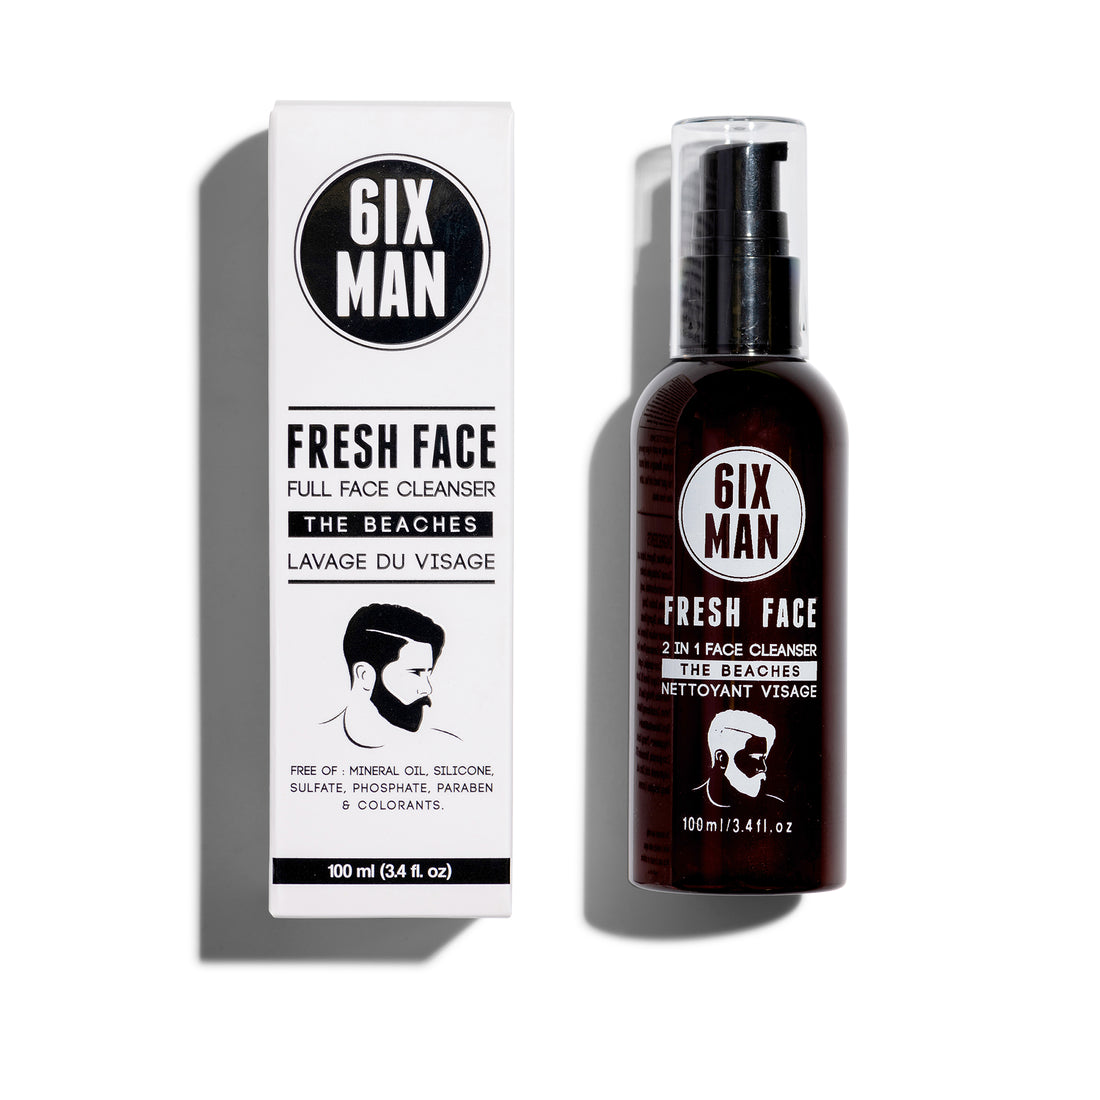 Fresh Face - Full Face Cleanser and Beard Wash